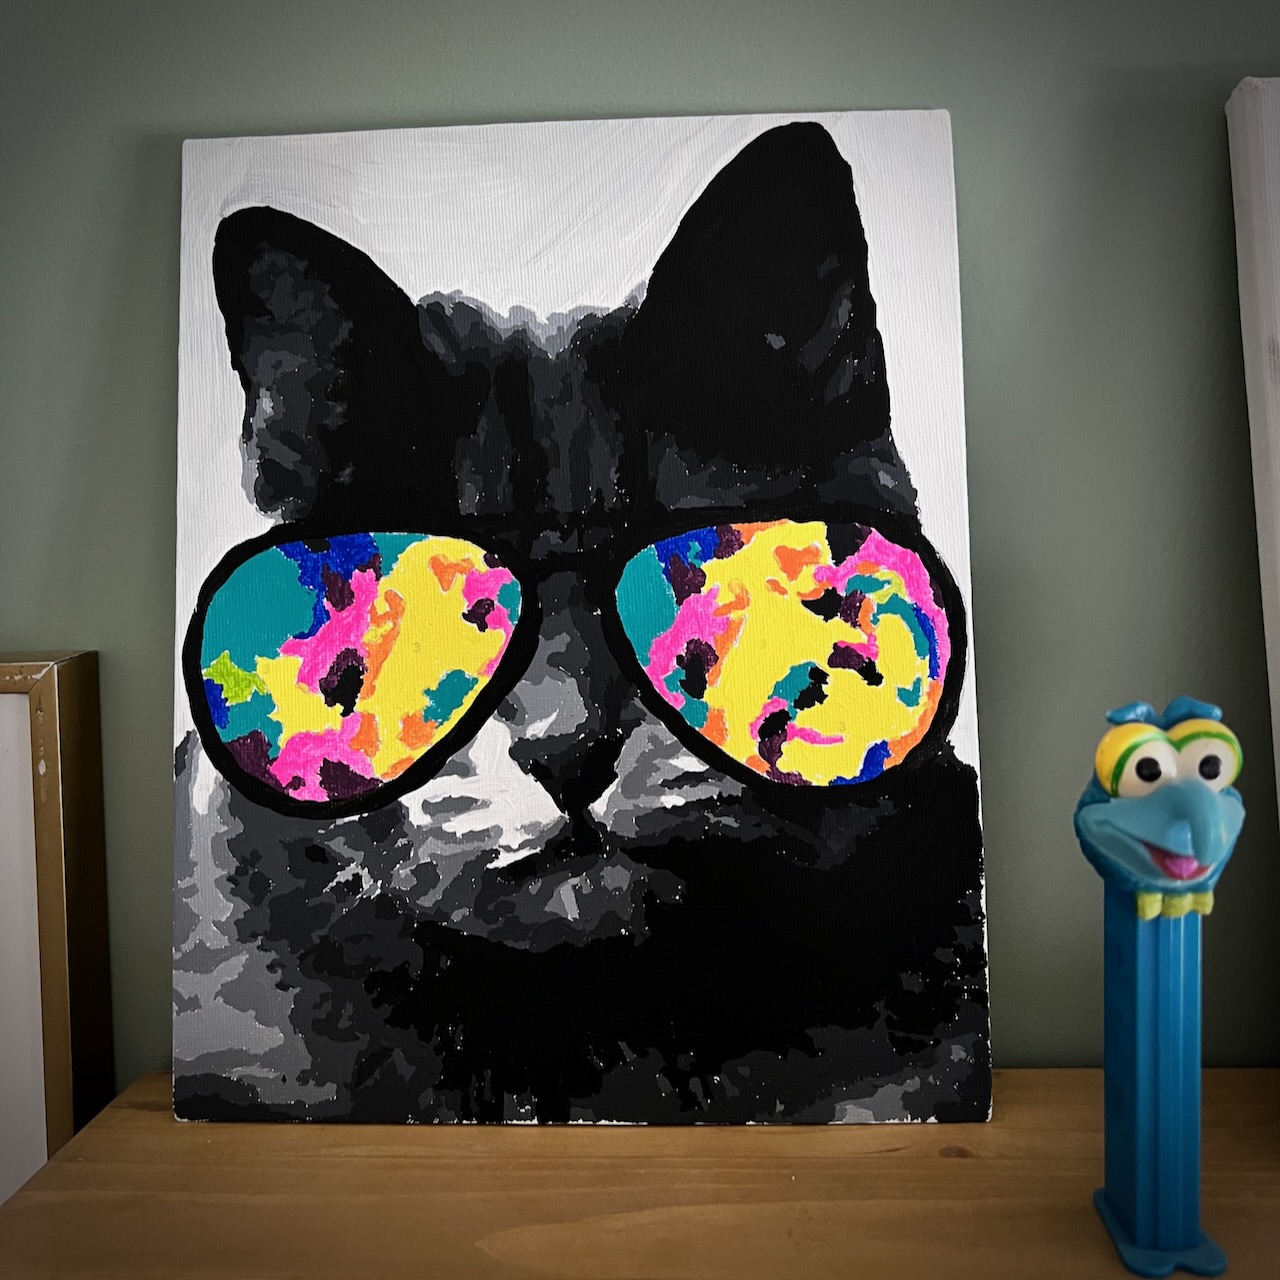 My finished paint by numbers picture of a cat with cool sunglasses.